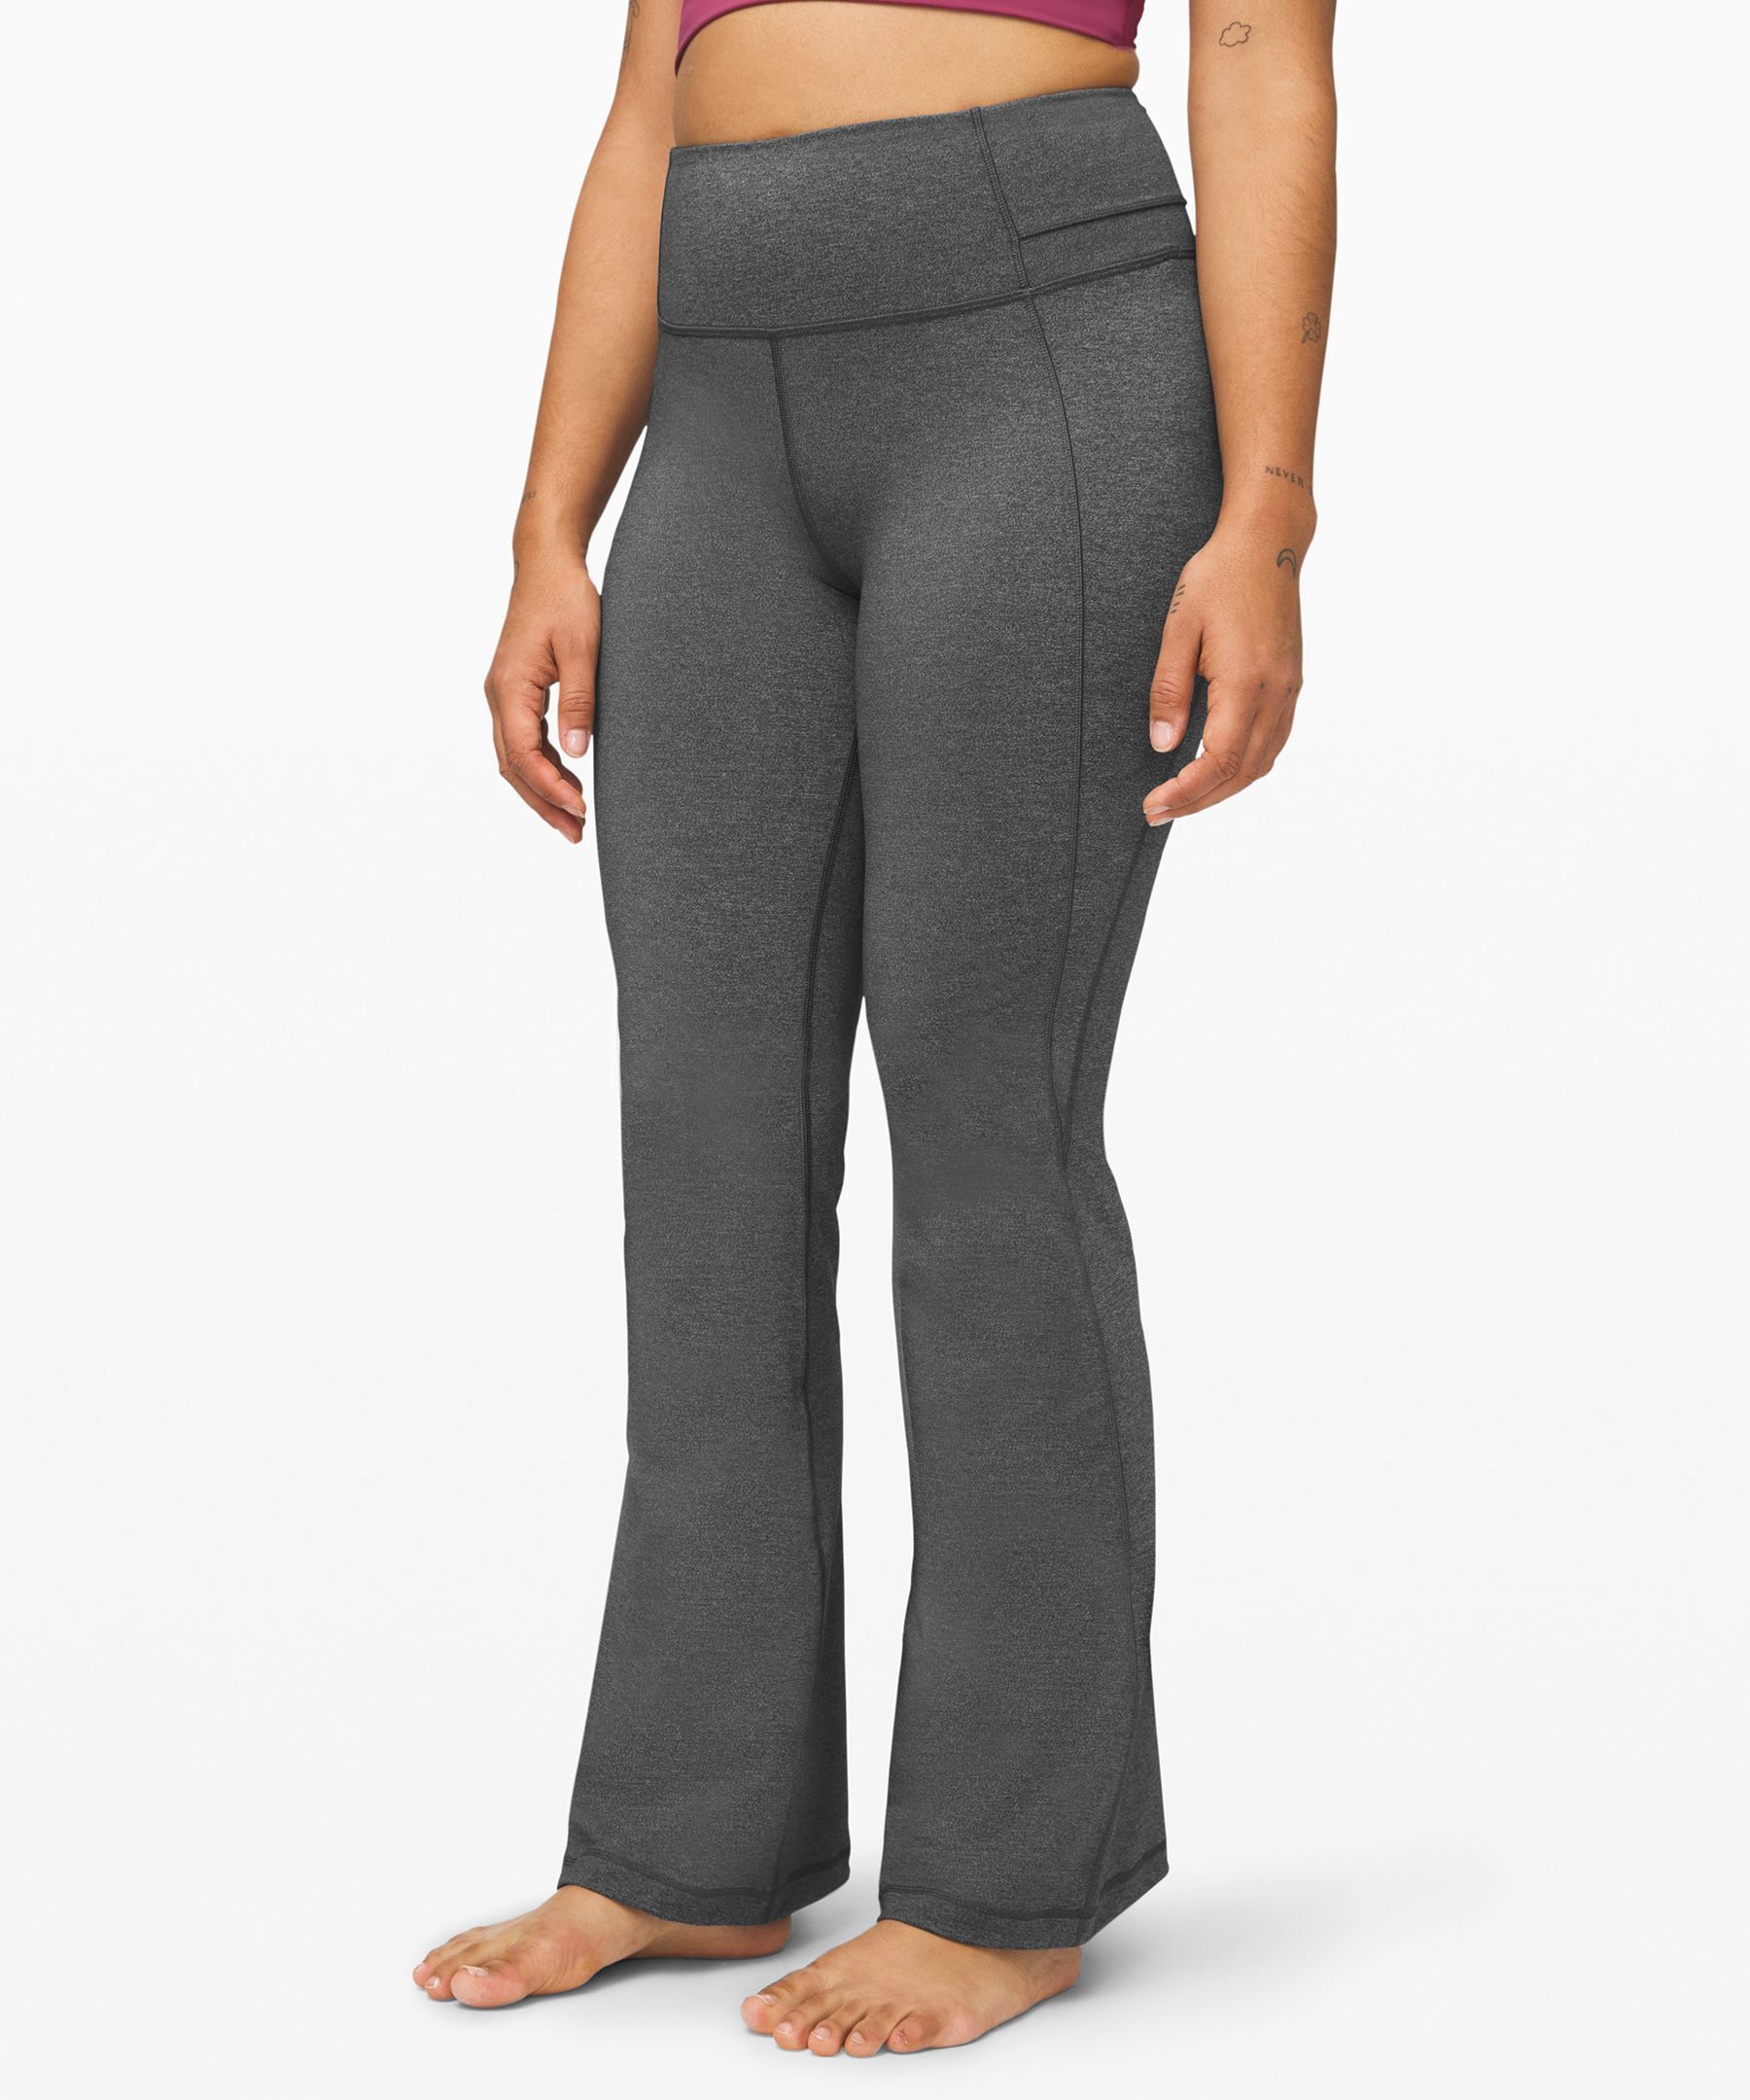 lululemon groove pant flare review